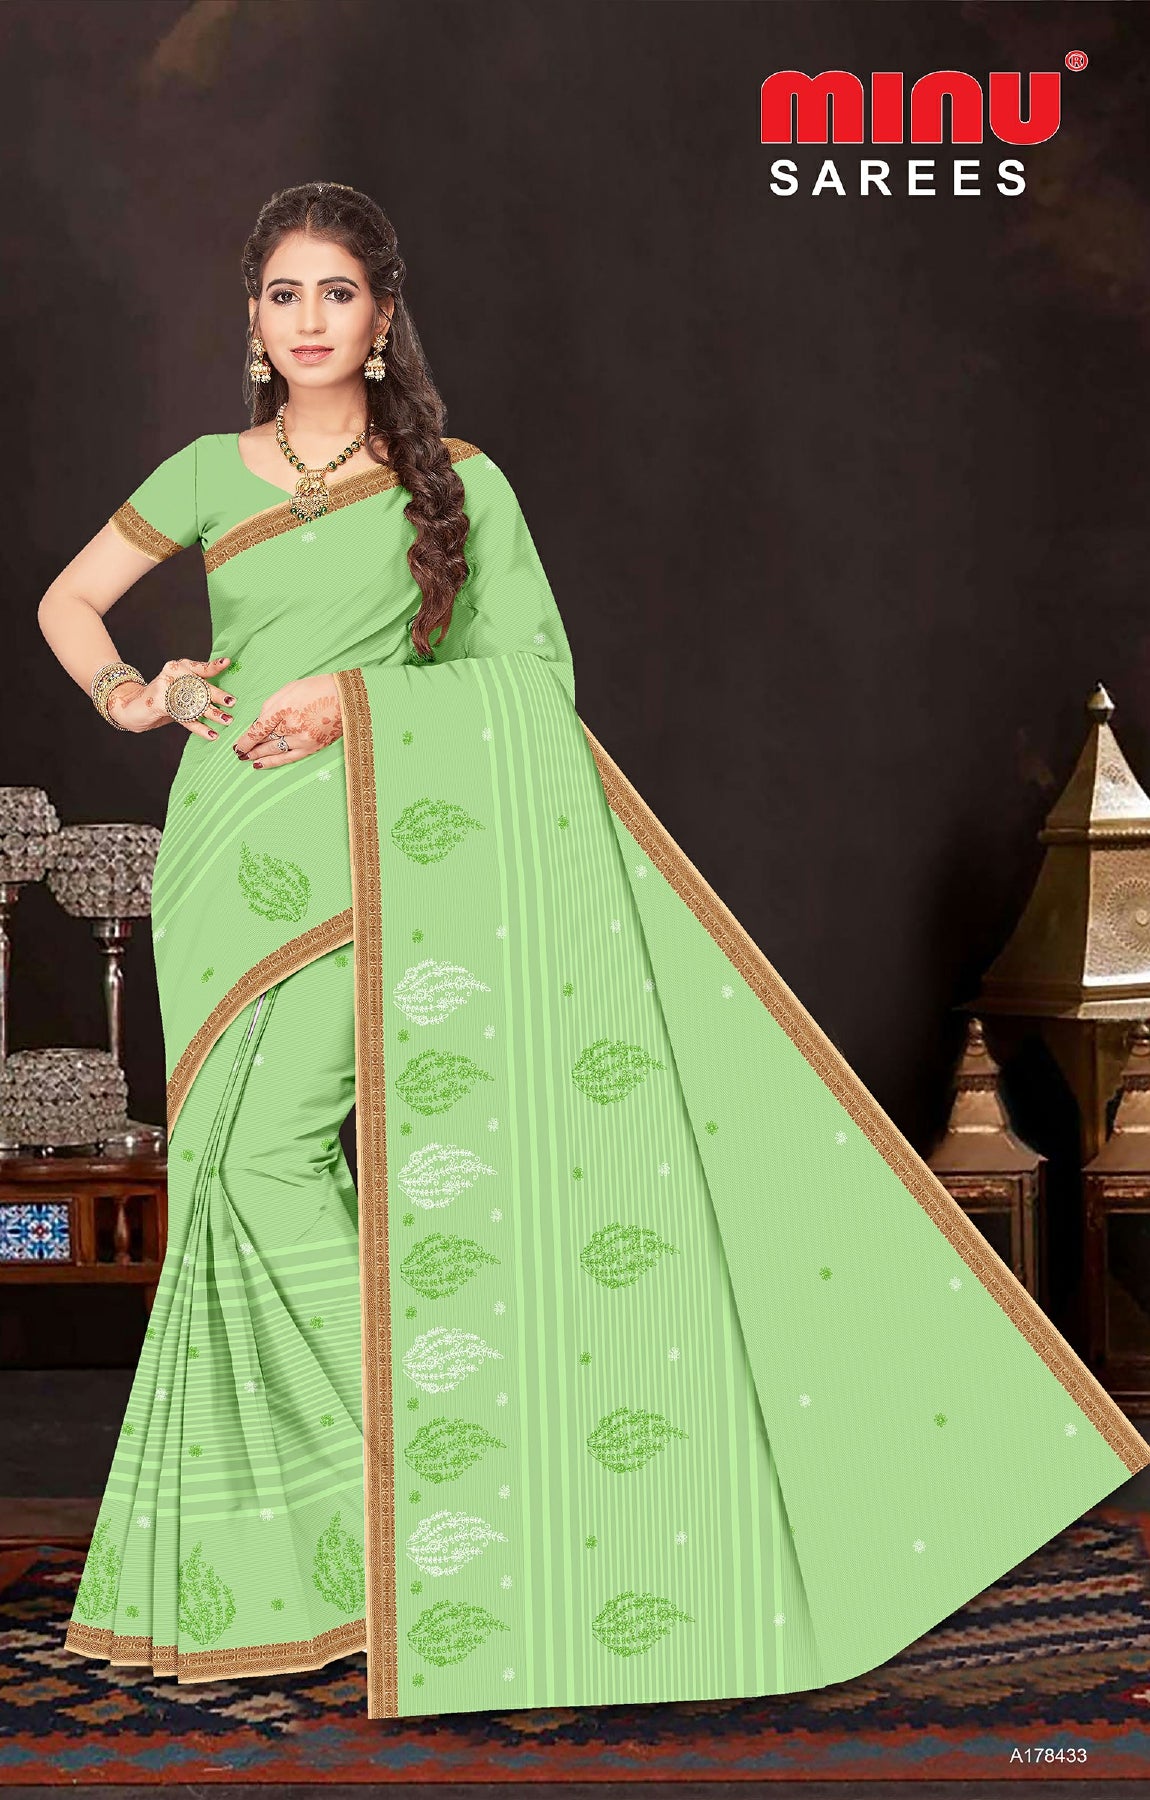 online image of green embroidered saree for sale